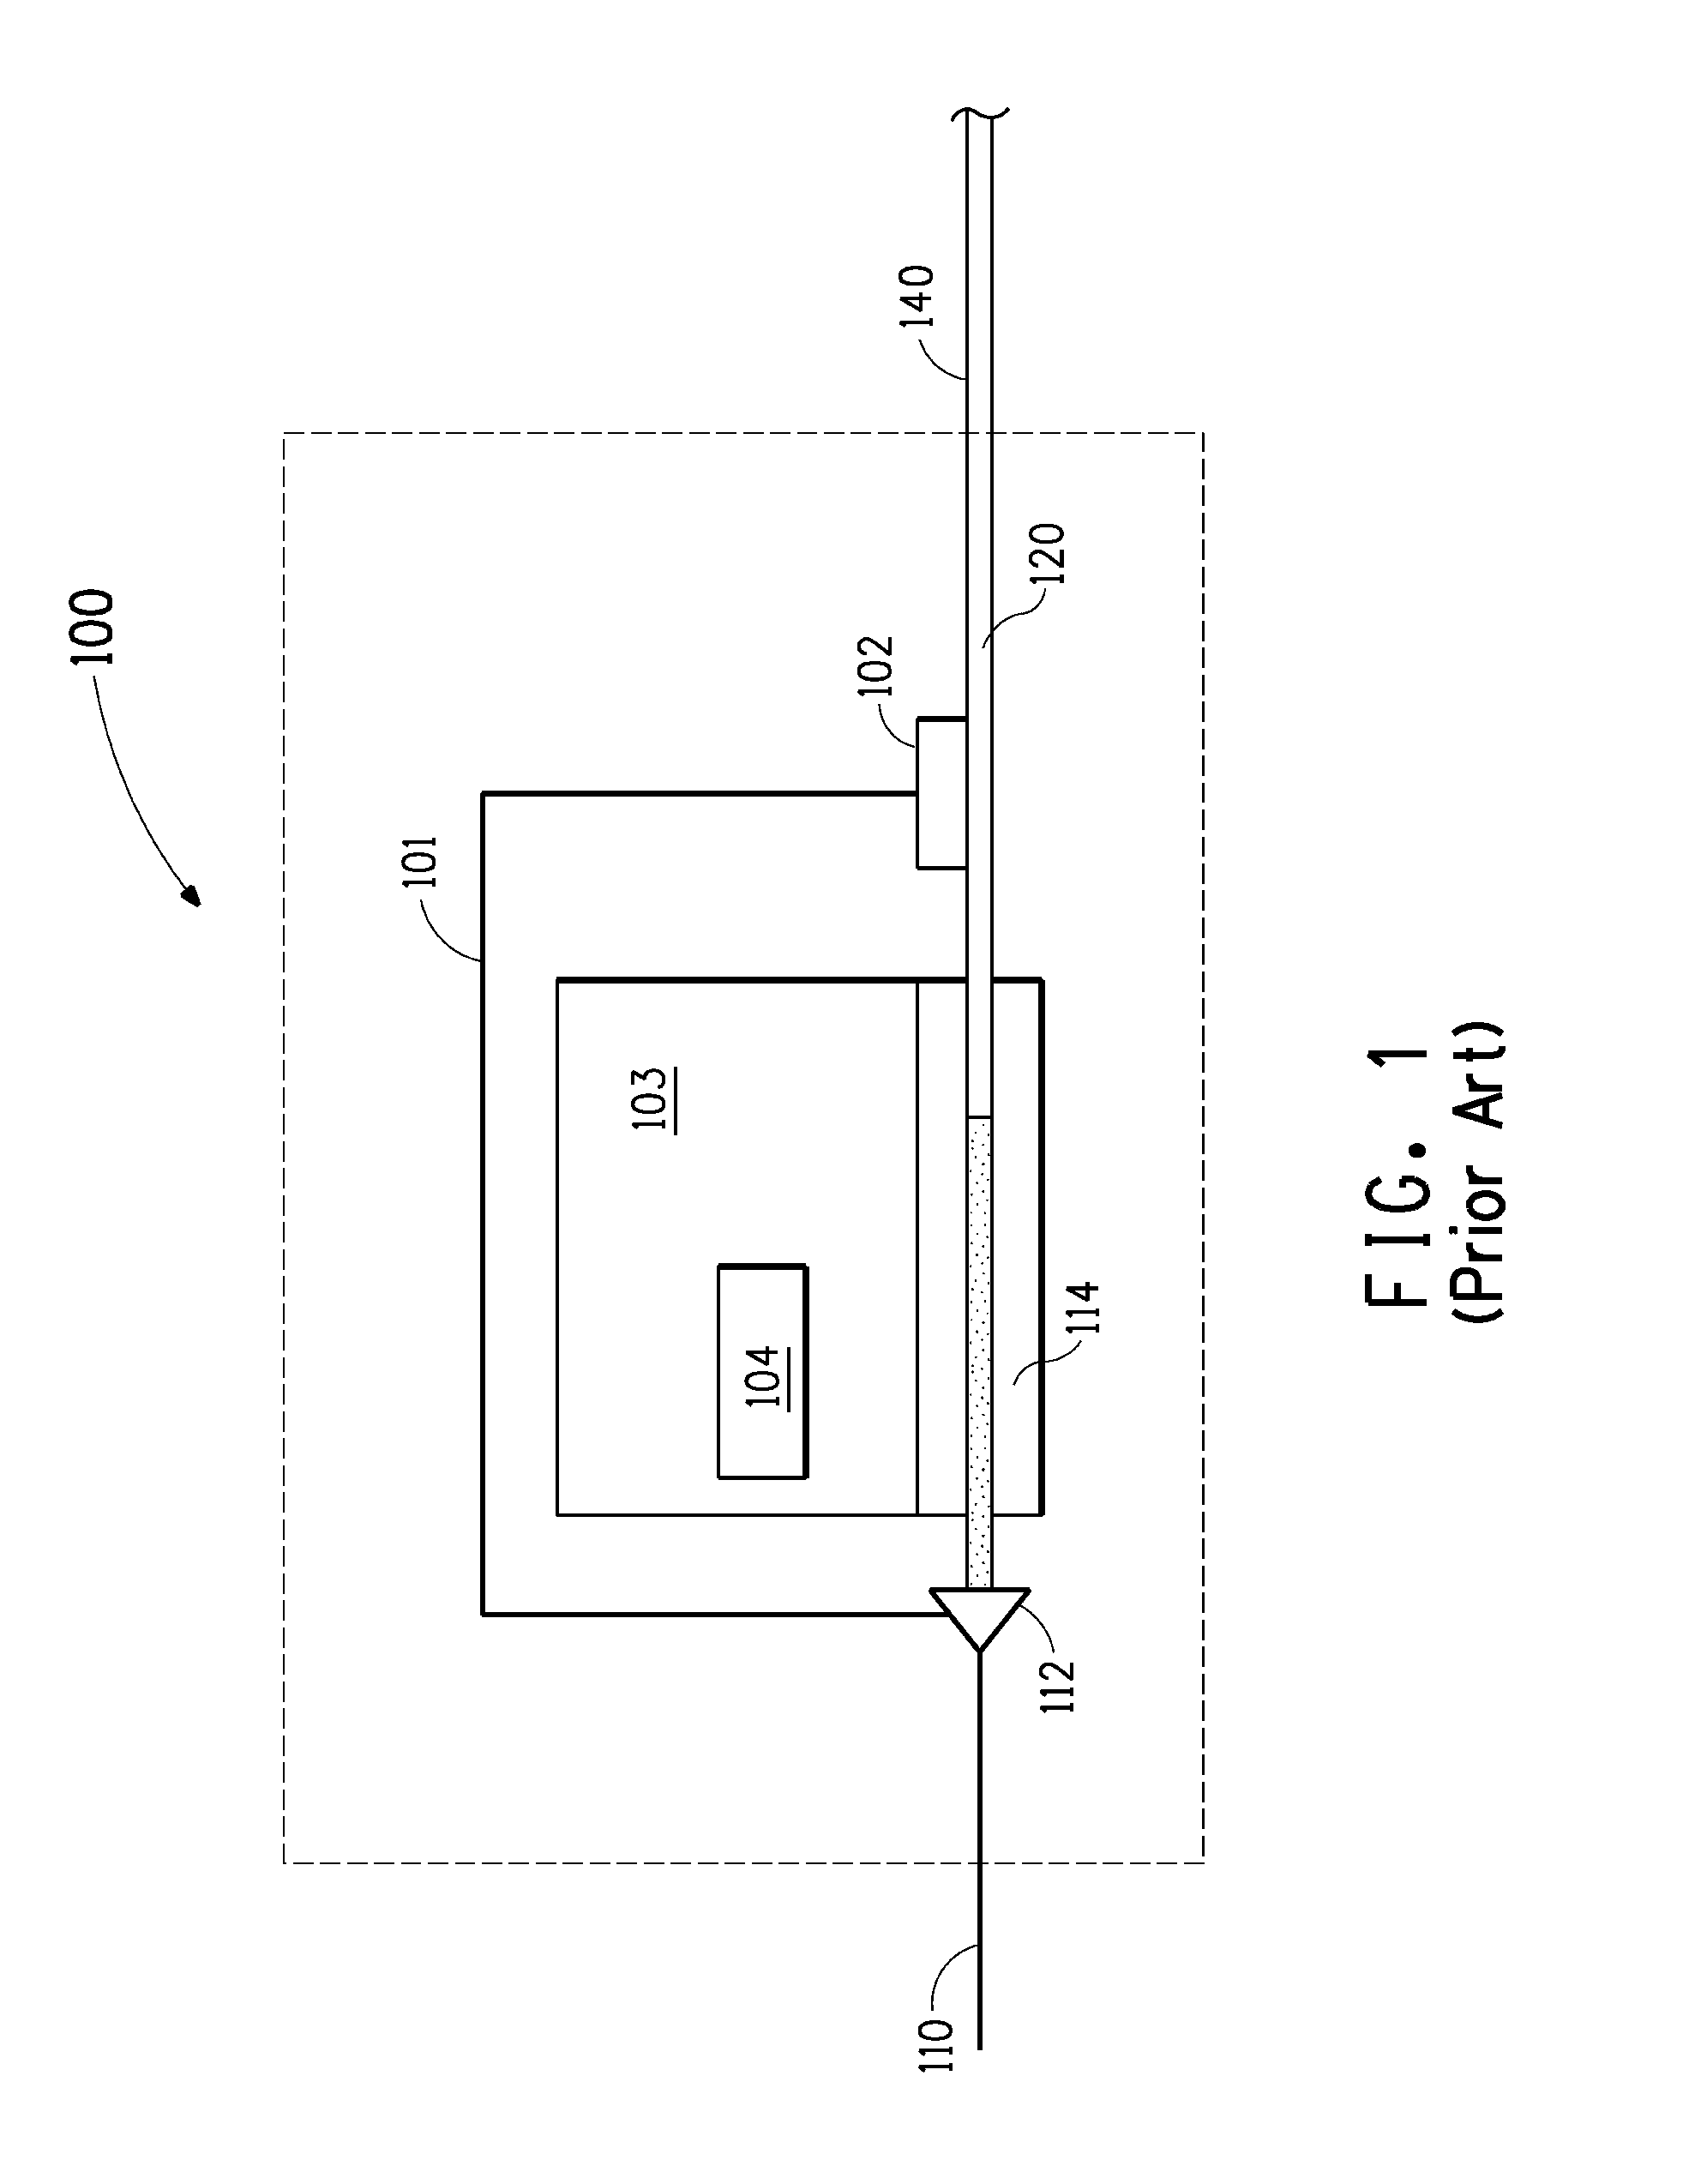 Fluorinated compositions and systems using such compositions